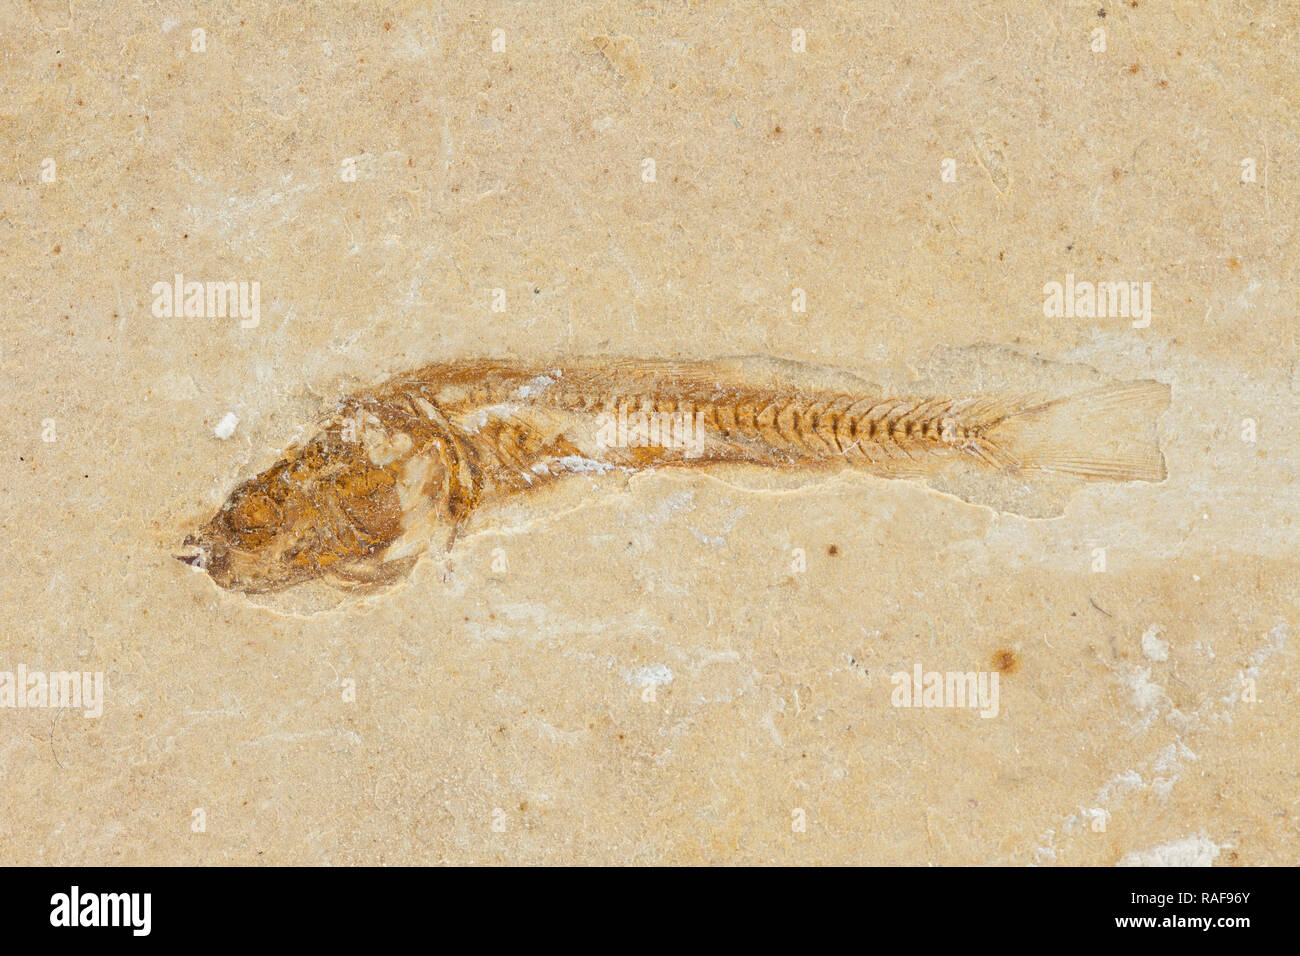 leptolepis brasiliensis, prehistoric fossil fish enclosed in stone Stock Photo